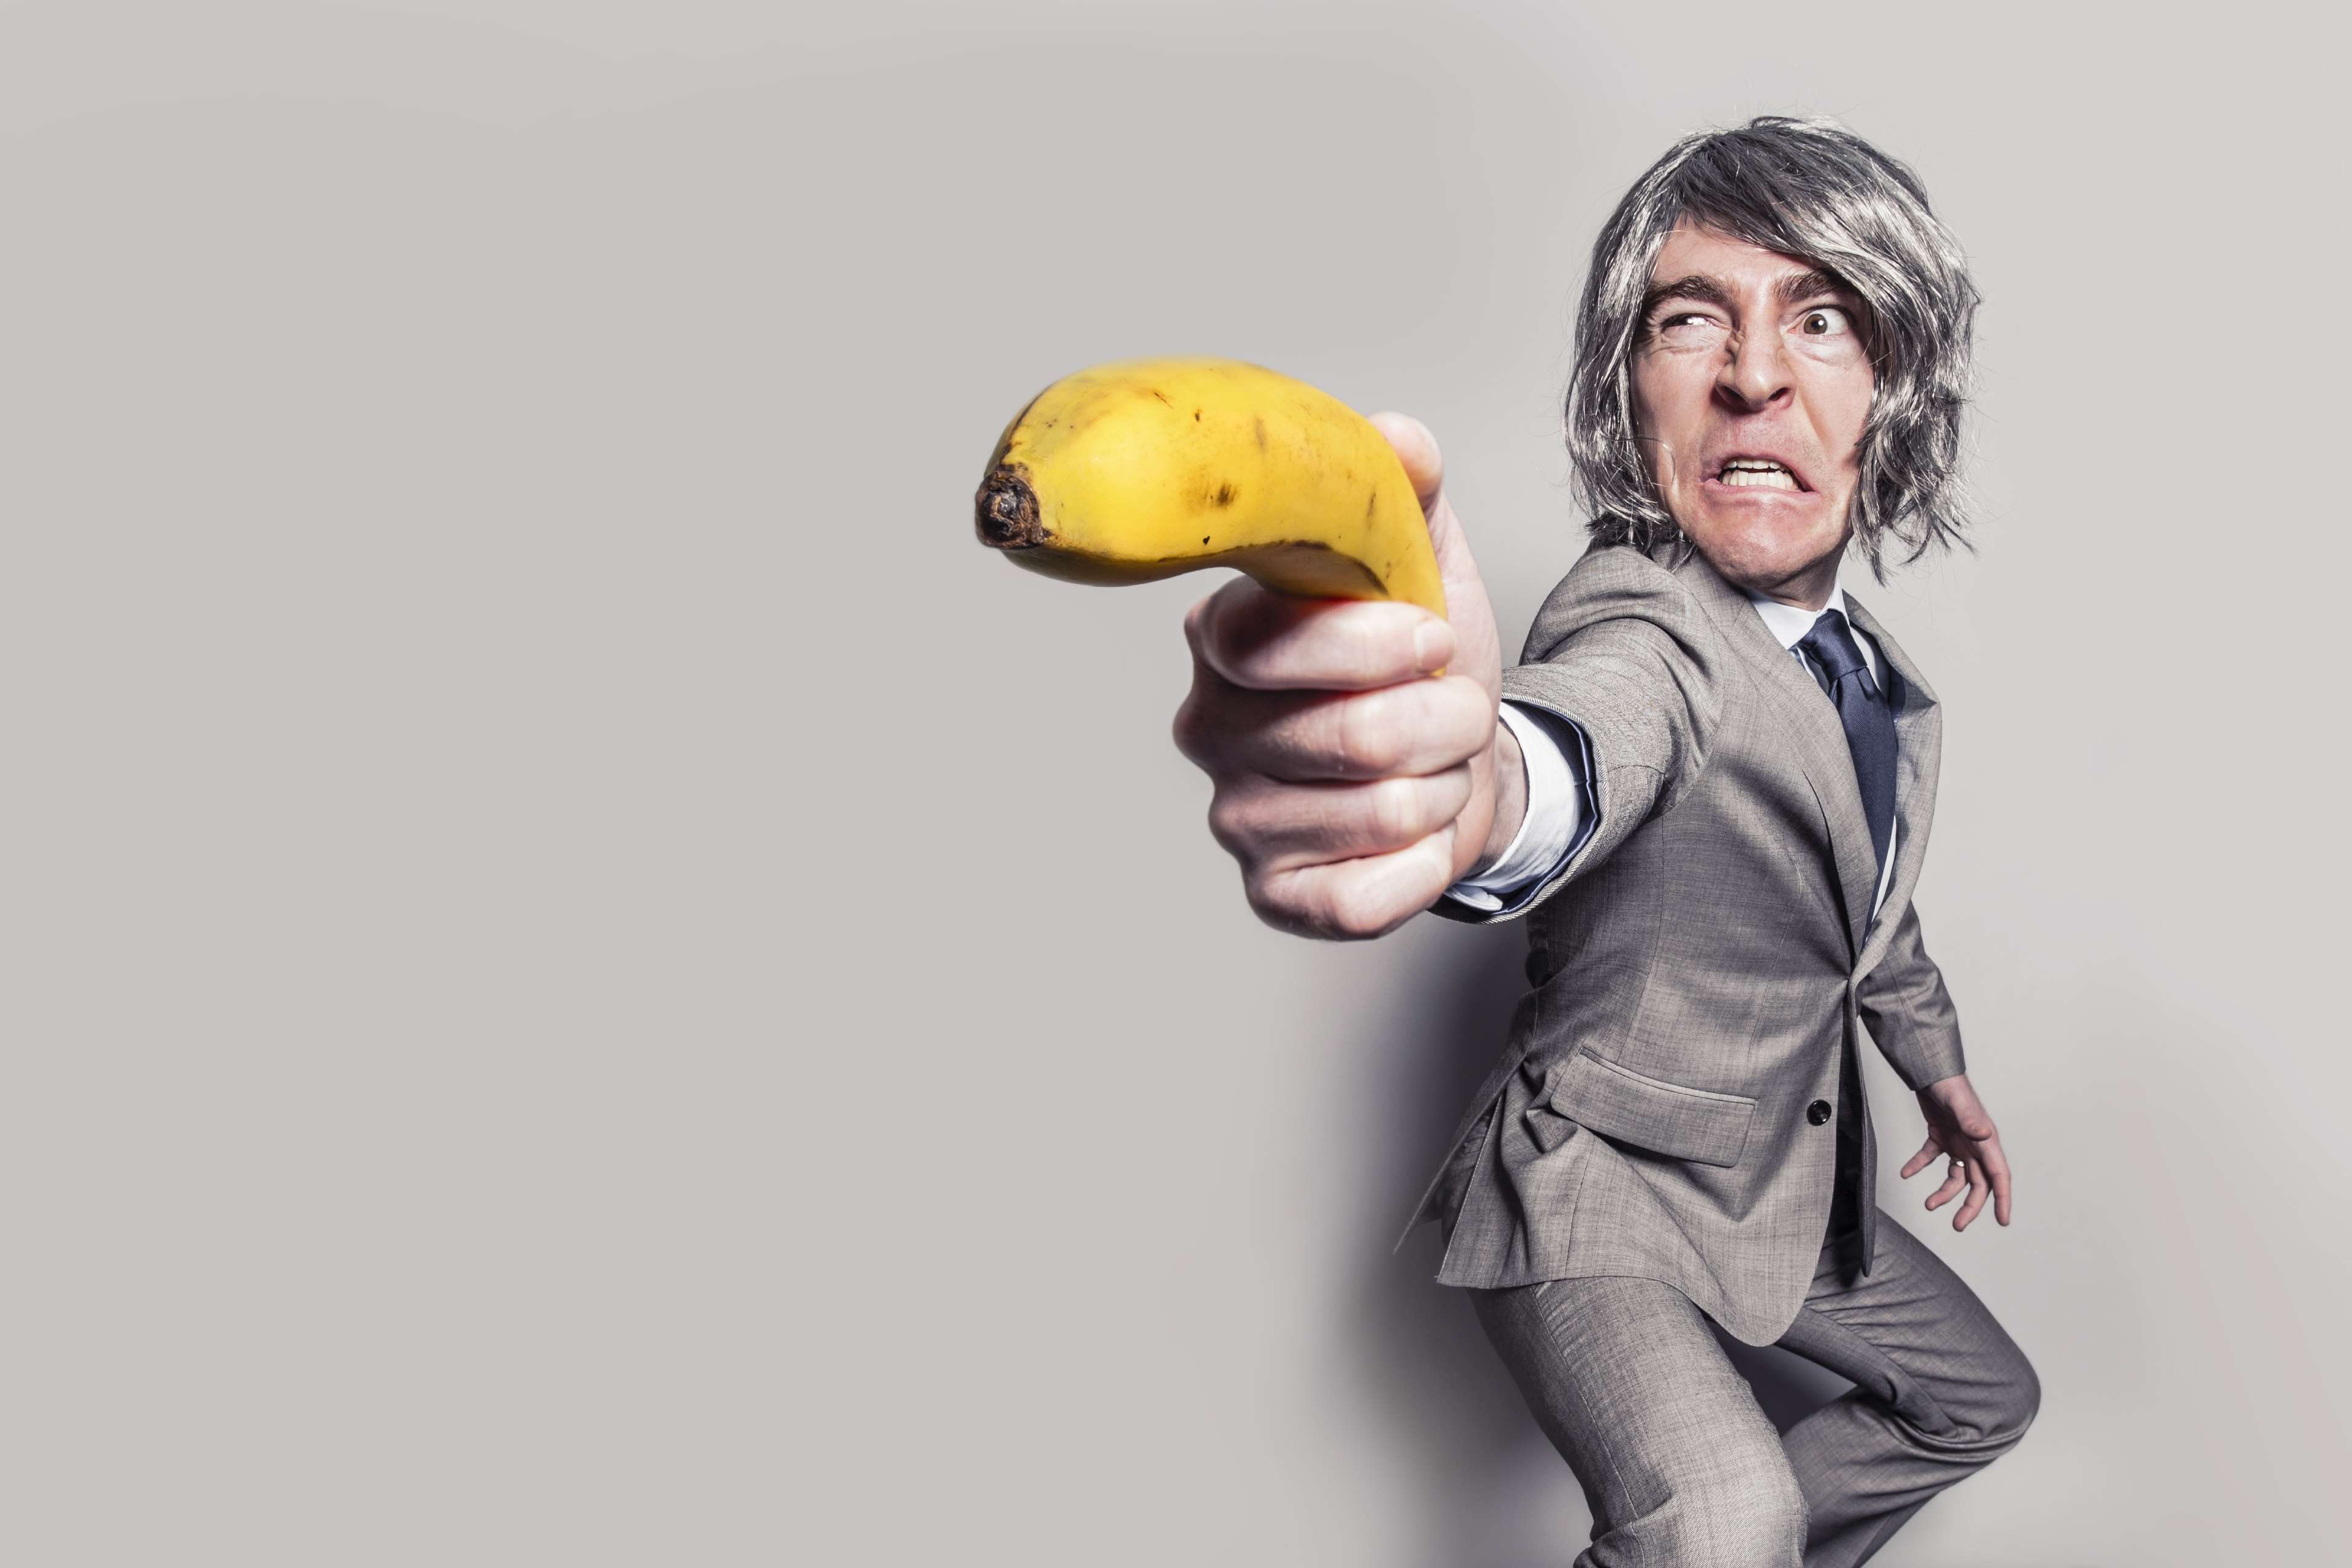 action, adult, angry, arm, banana, designer suit, expression, eyes, facial expression, formal, funny, hands, man, model, necktie, outfit, person, photohoot, posing, posture, robbery, suit, tie 4k wallpaper